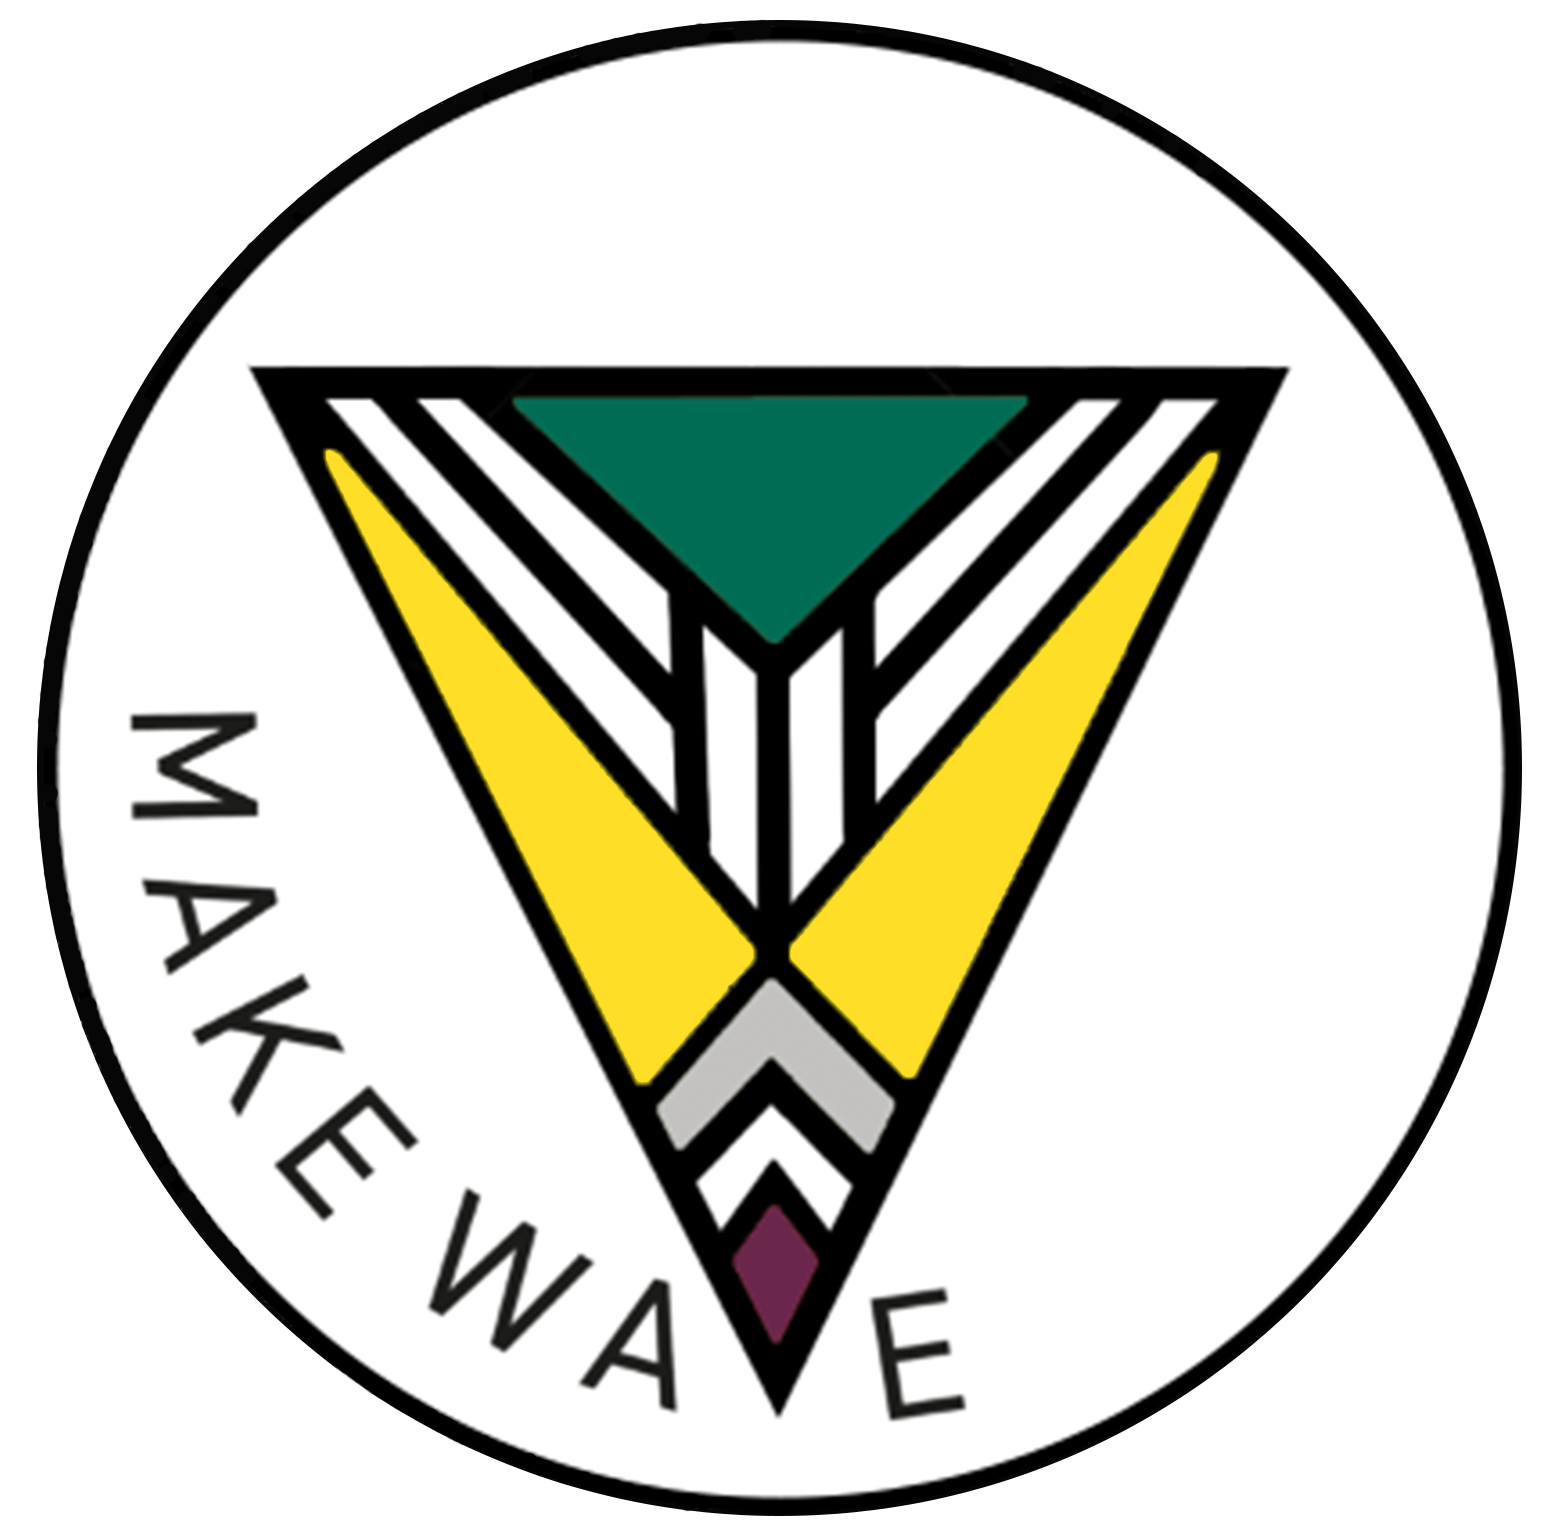 Make Wave Productions